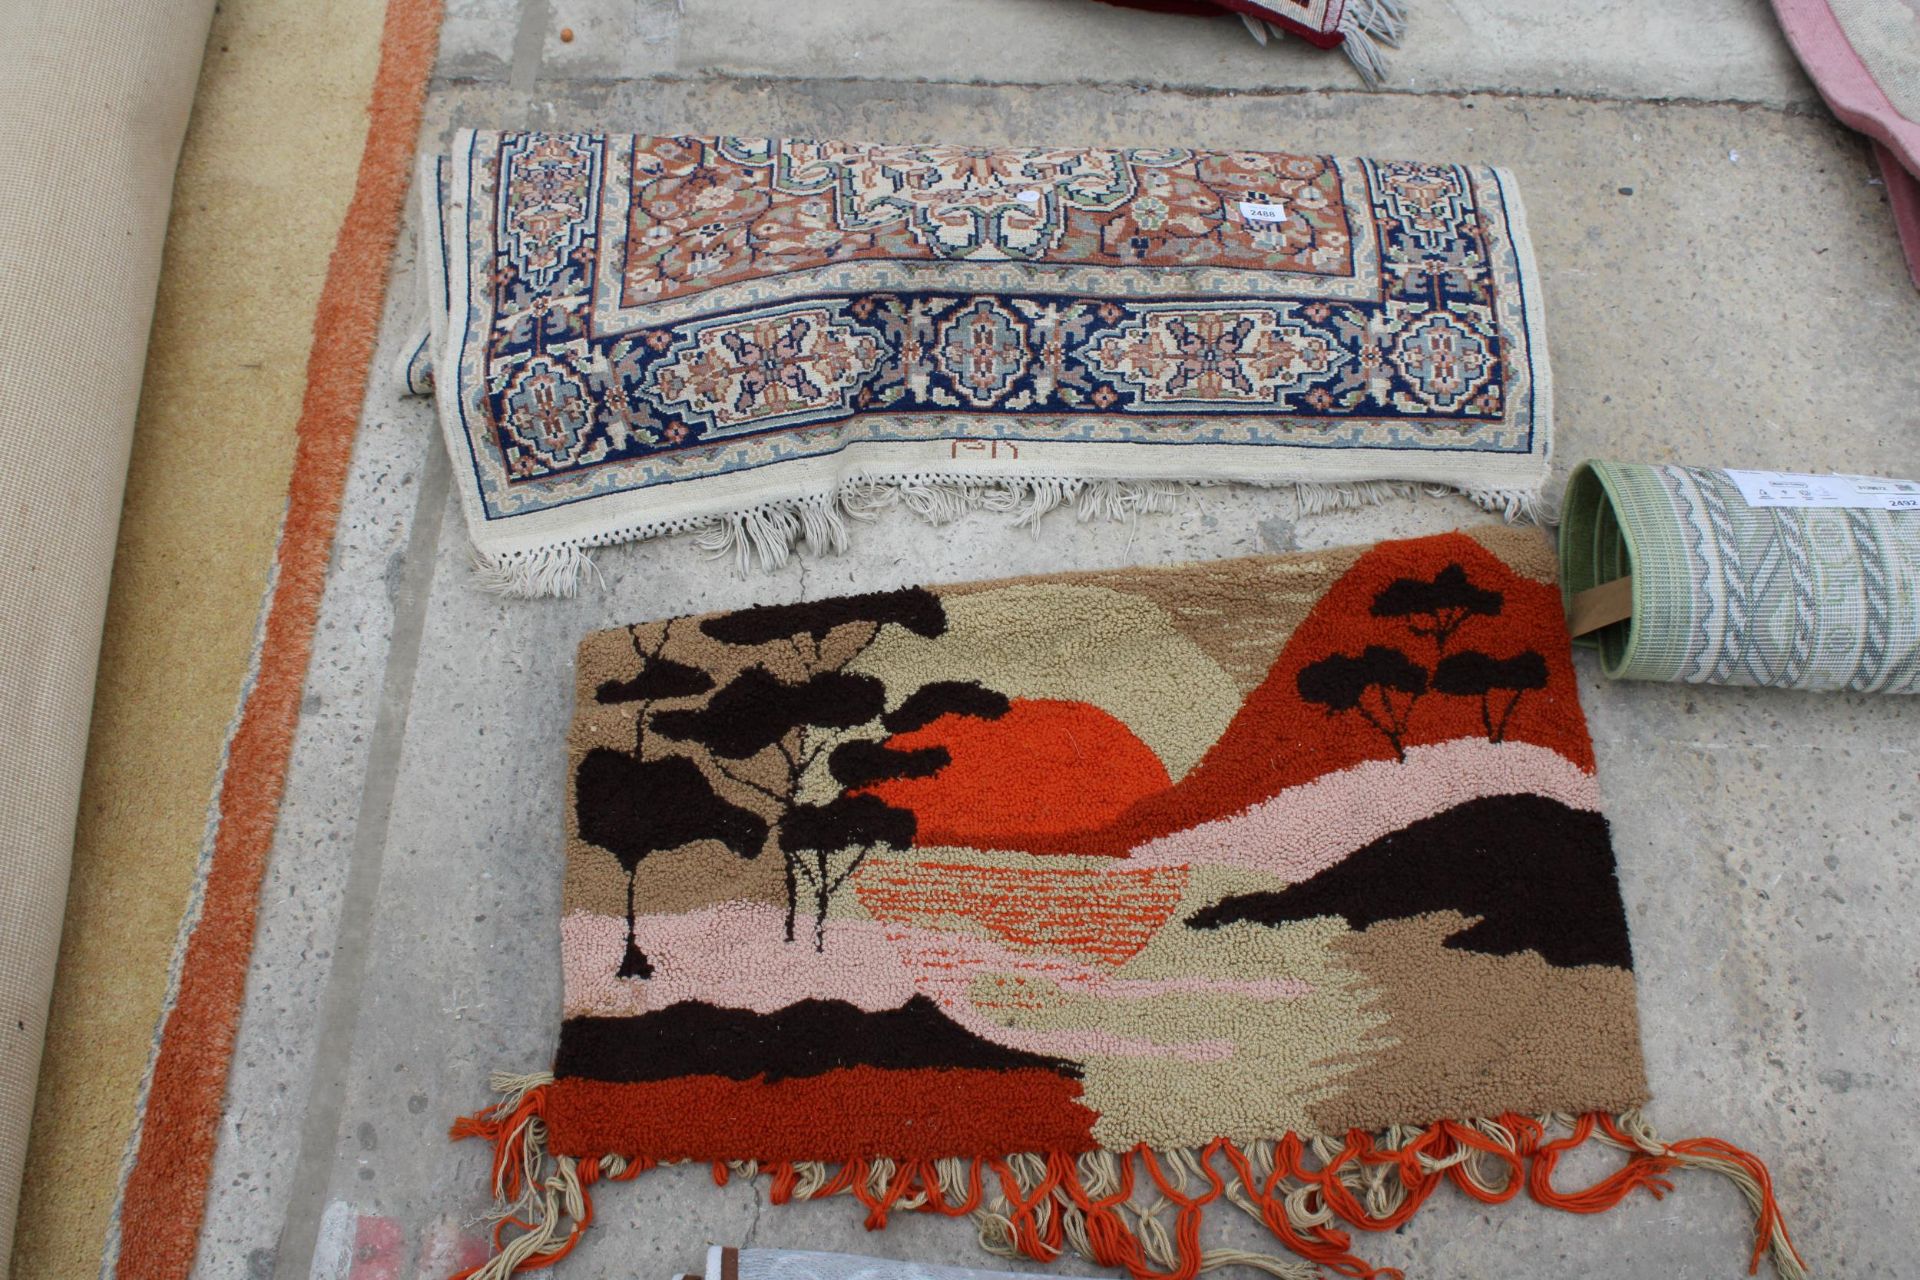 TWO VARIOUS PATTERNED RUGS